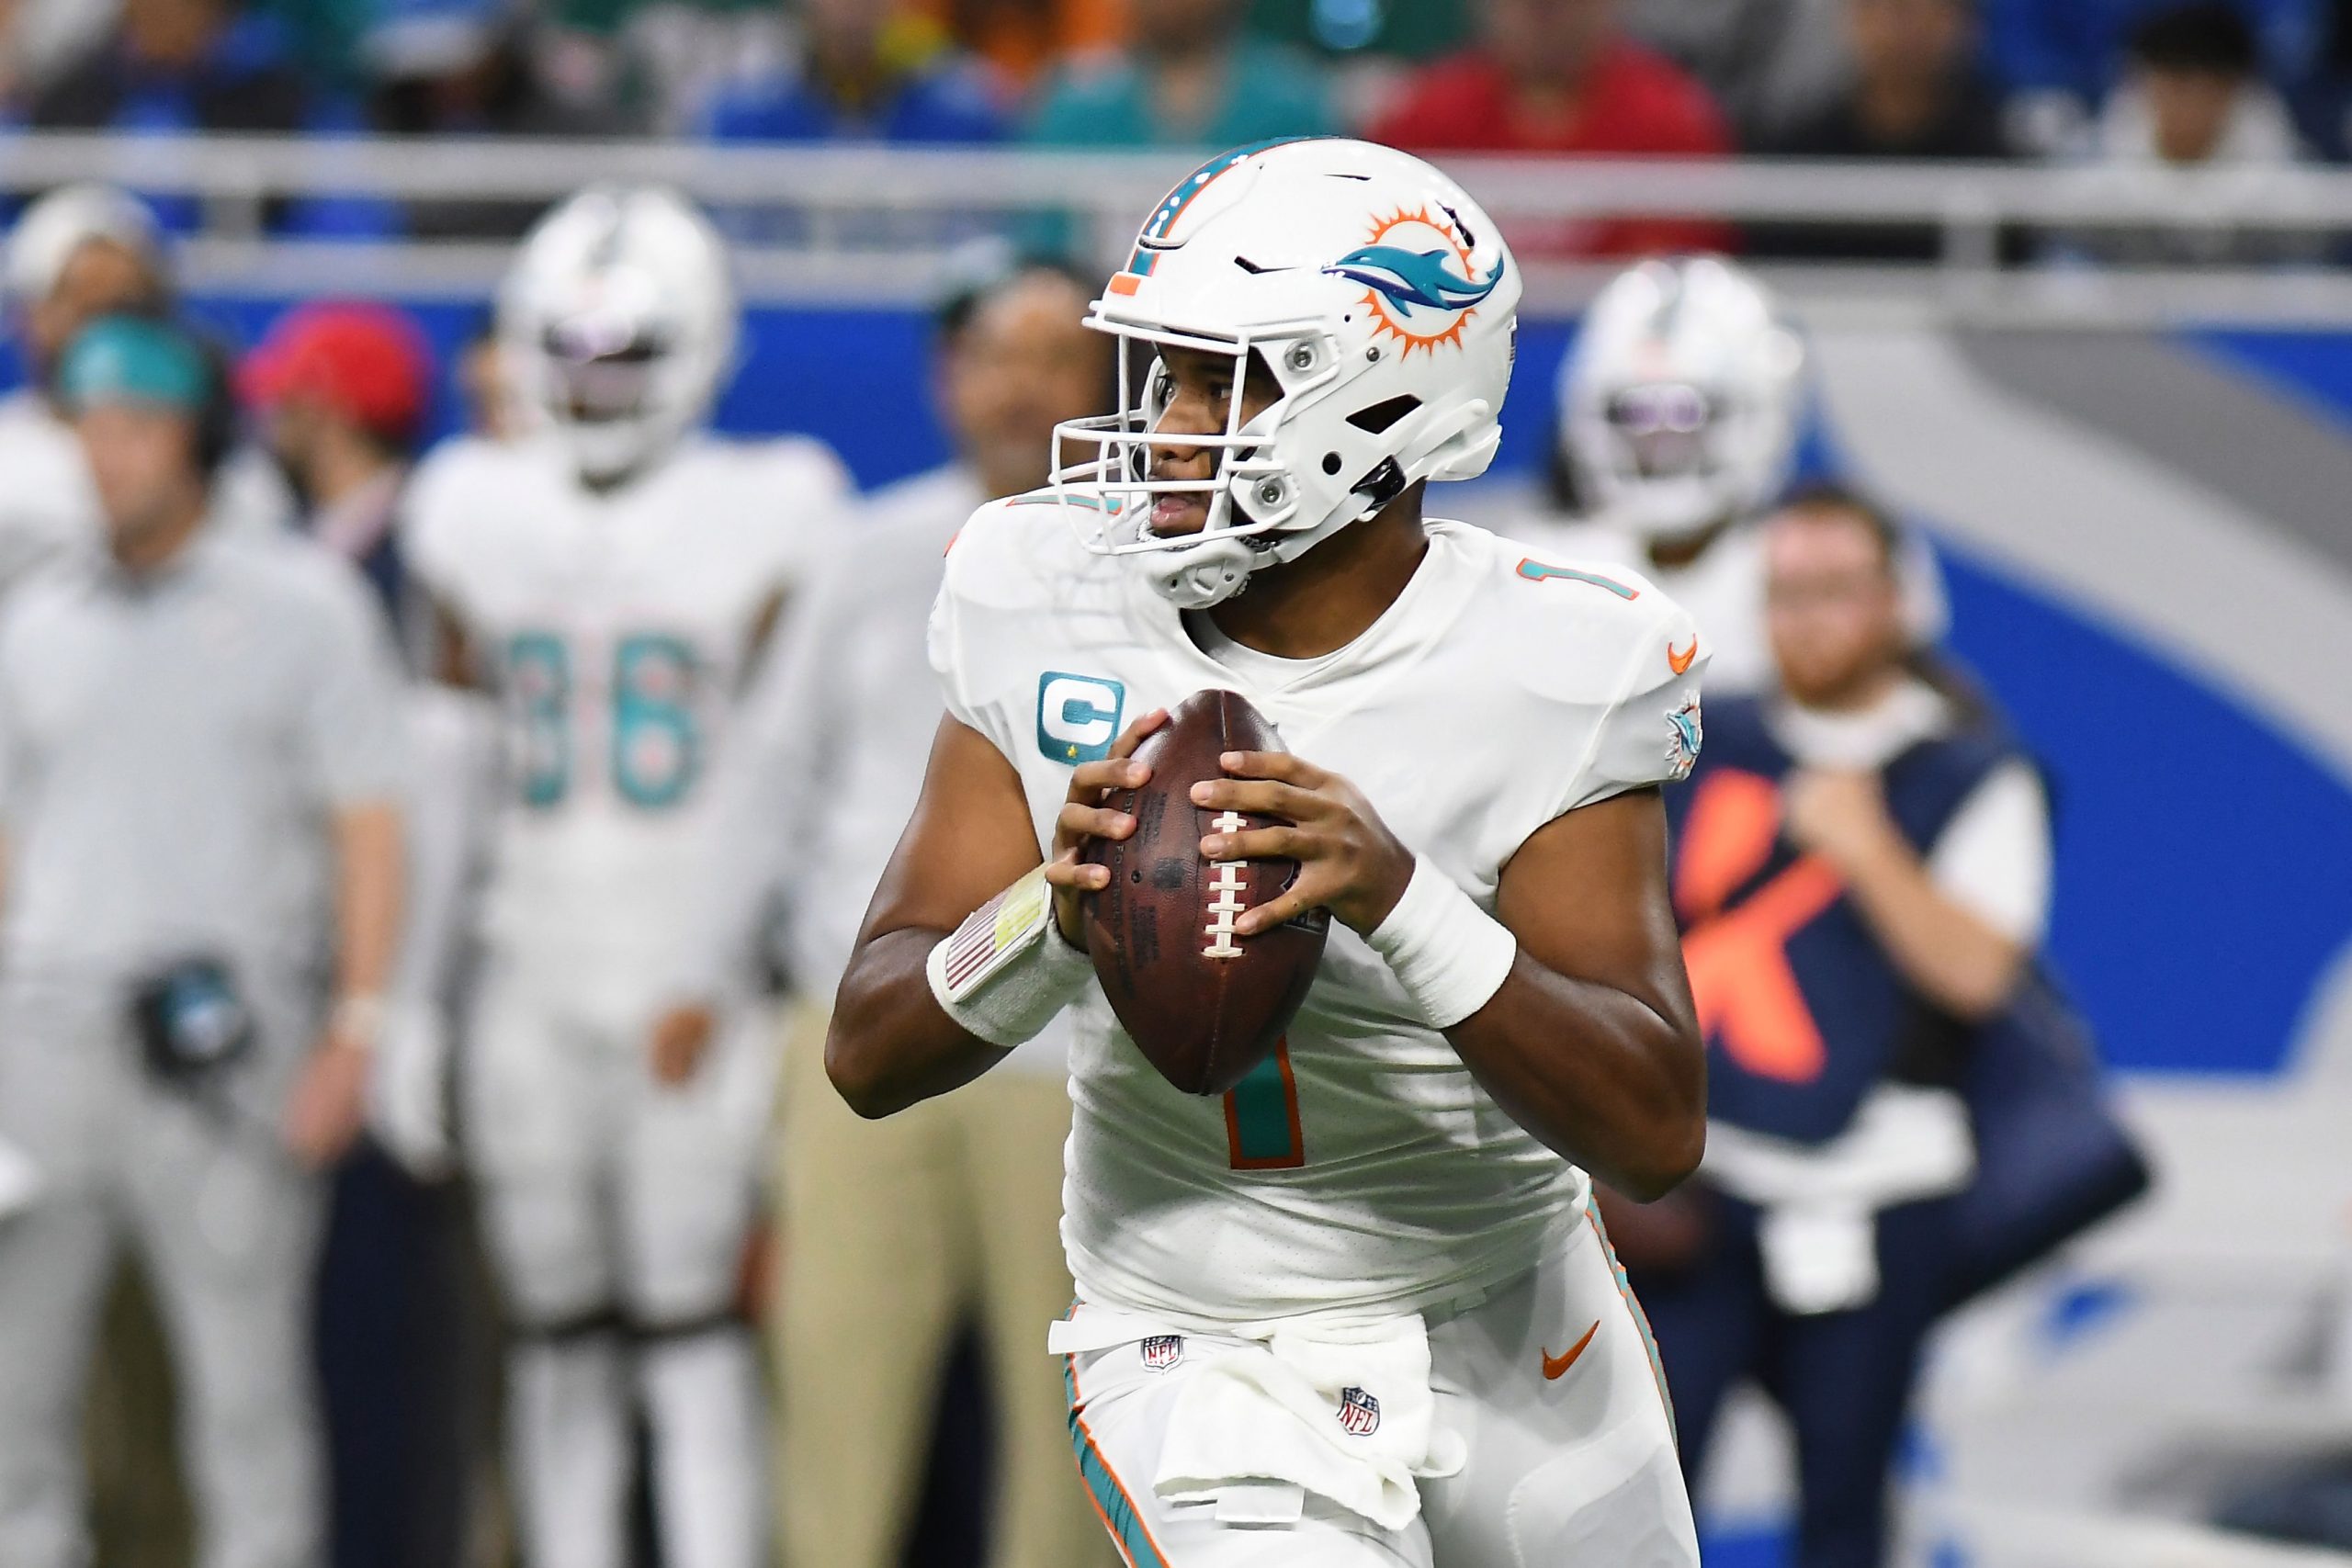 Miami Dolphins’ Tua Tagovailoa trolled for throwing interceptions vs Green Bay Packers on Christmas day